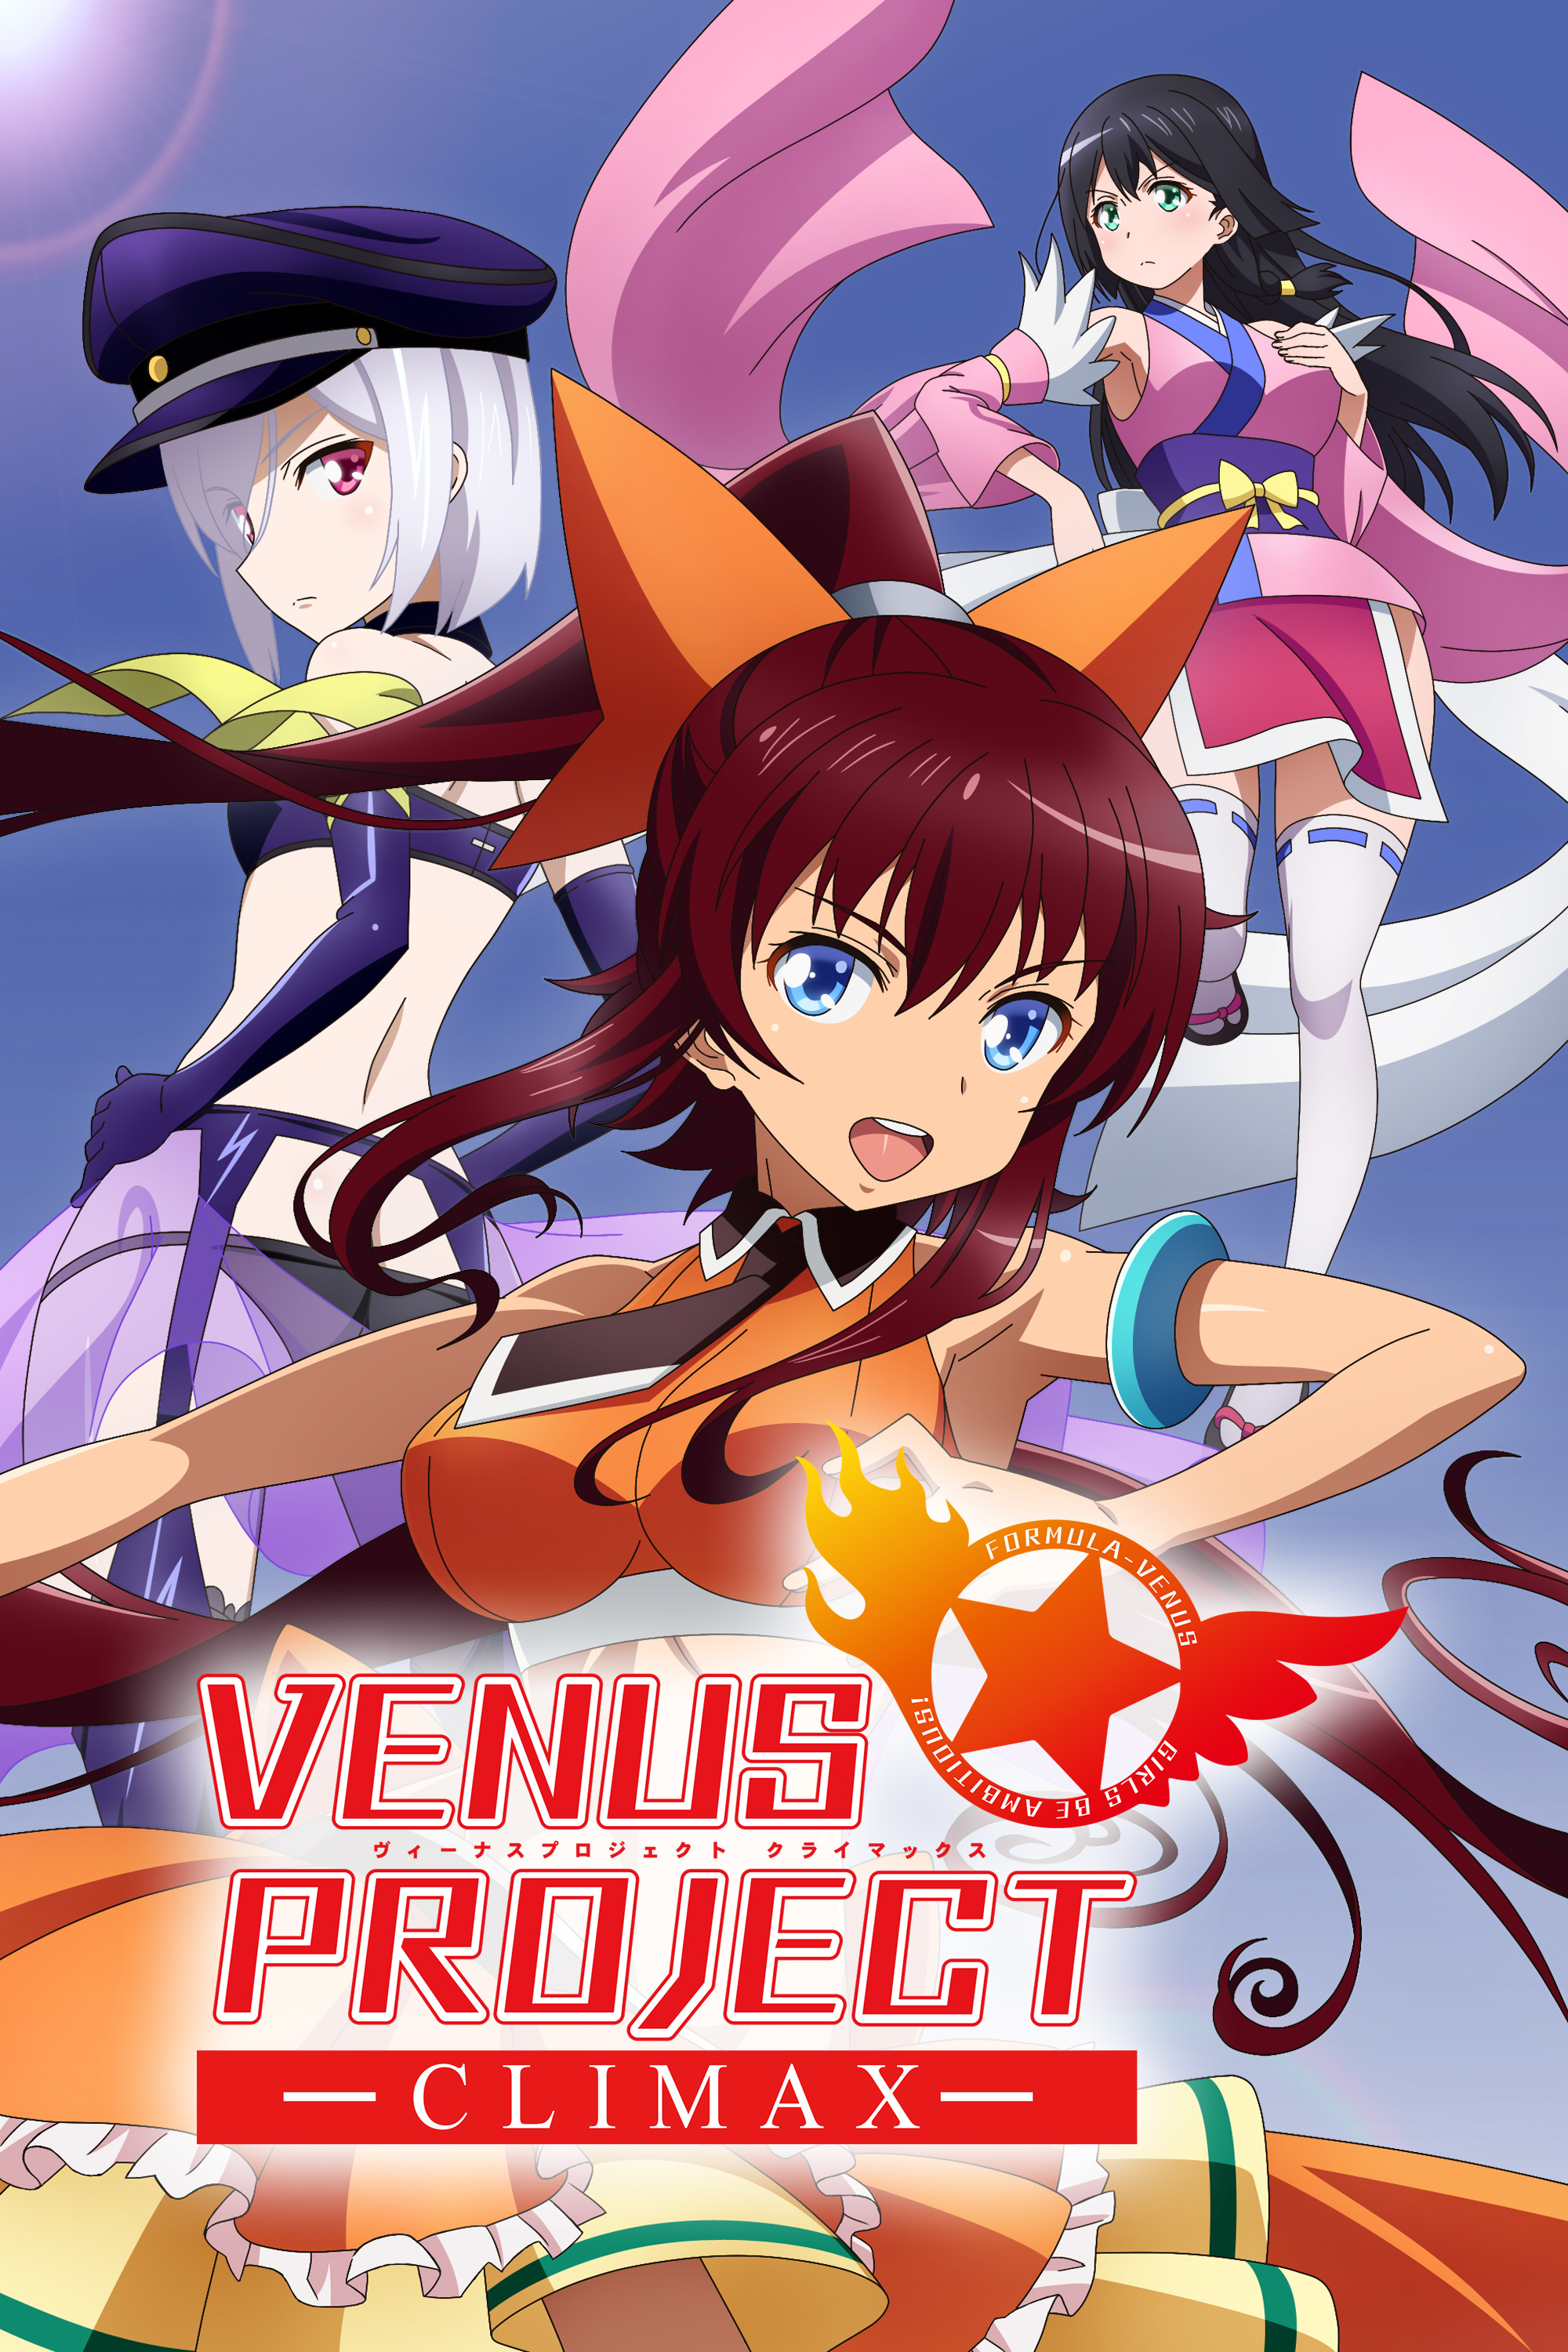 Watch Venus Project Climax Sub Dub Comedy Slice Of Life Anime Funimation